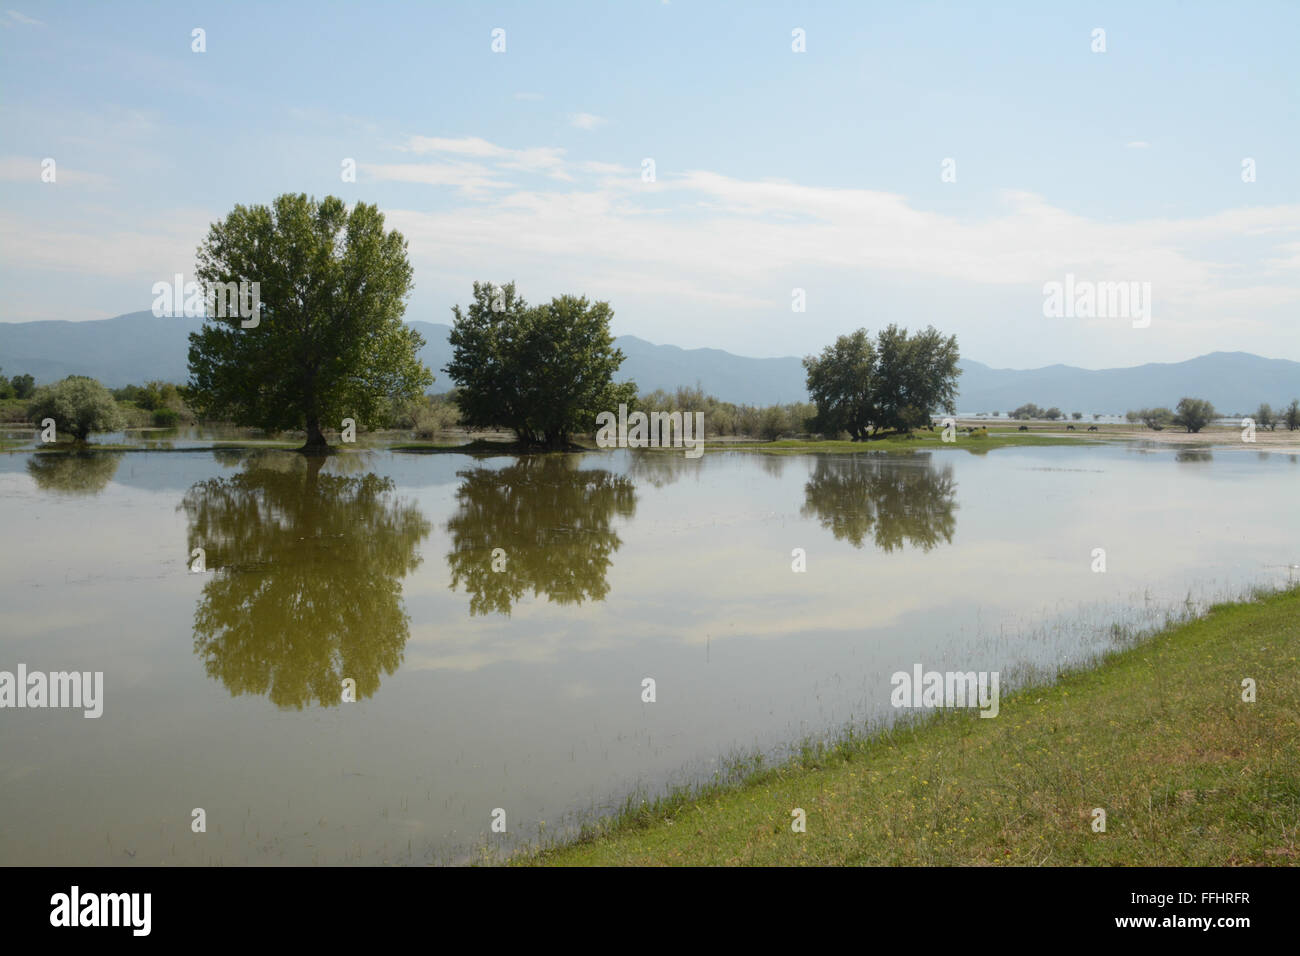 Greek landscape at lake Kerkini during summer, with reflections of trees and mountains Stock Photo